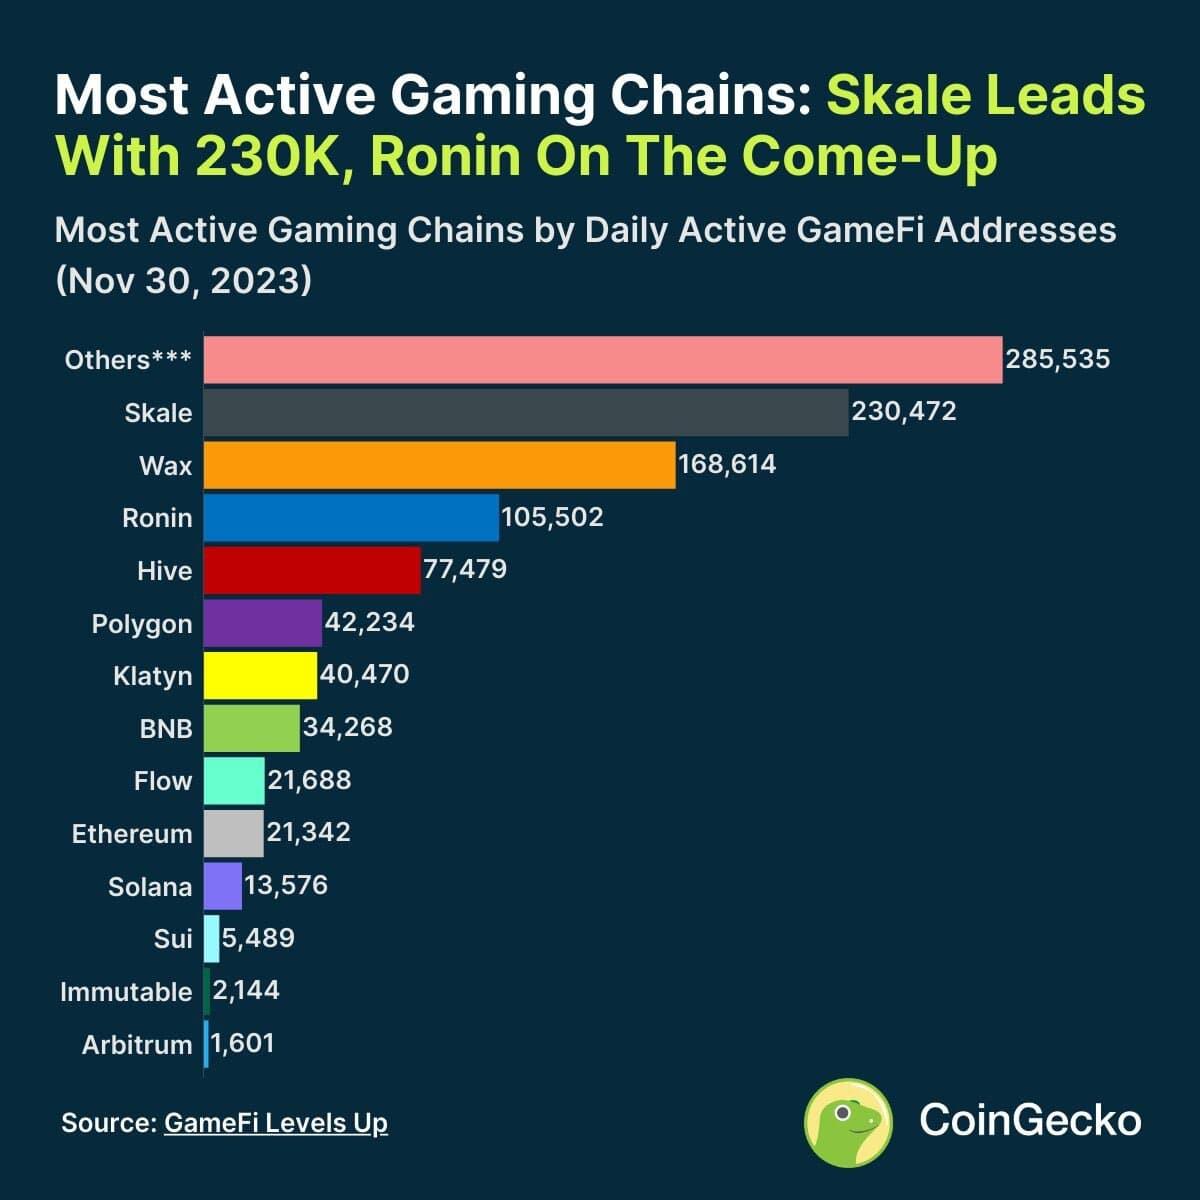 SKALE is the most active blockchain for gaming by Daily Active Addresses